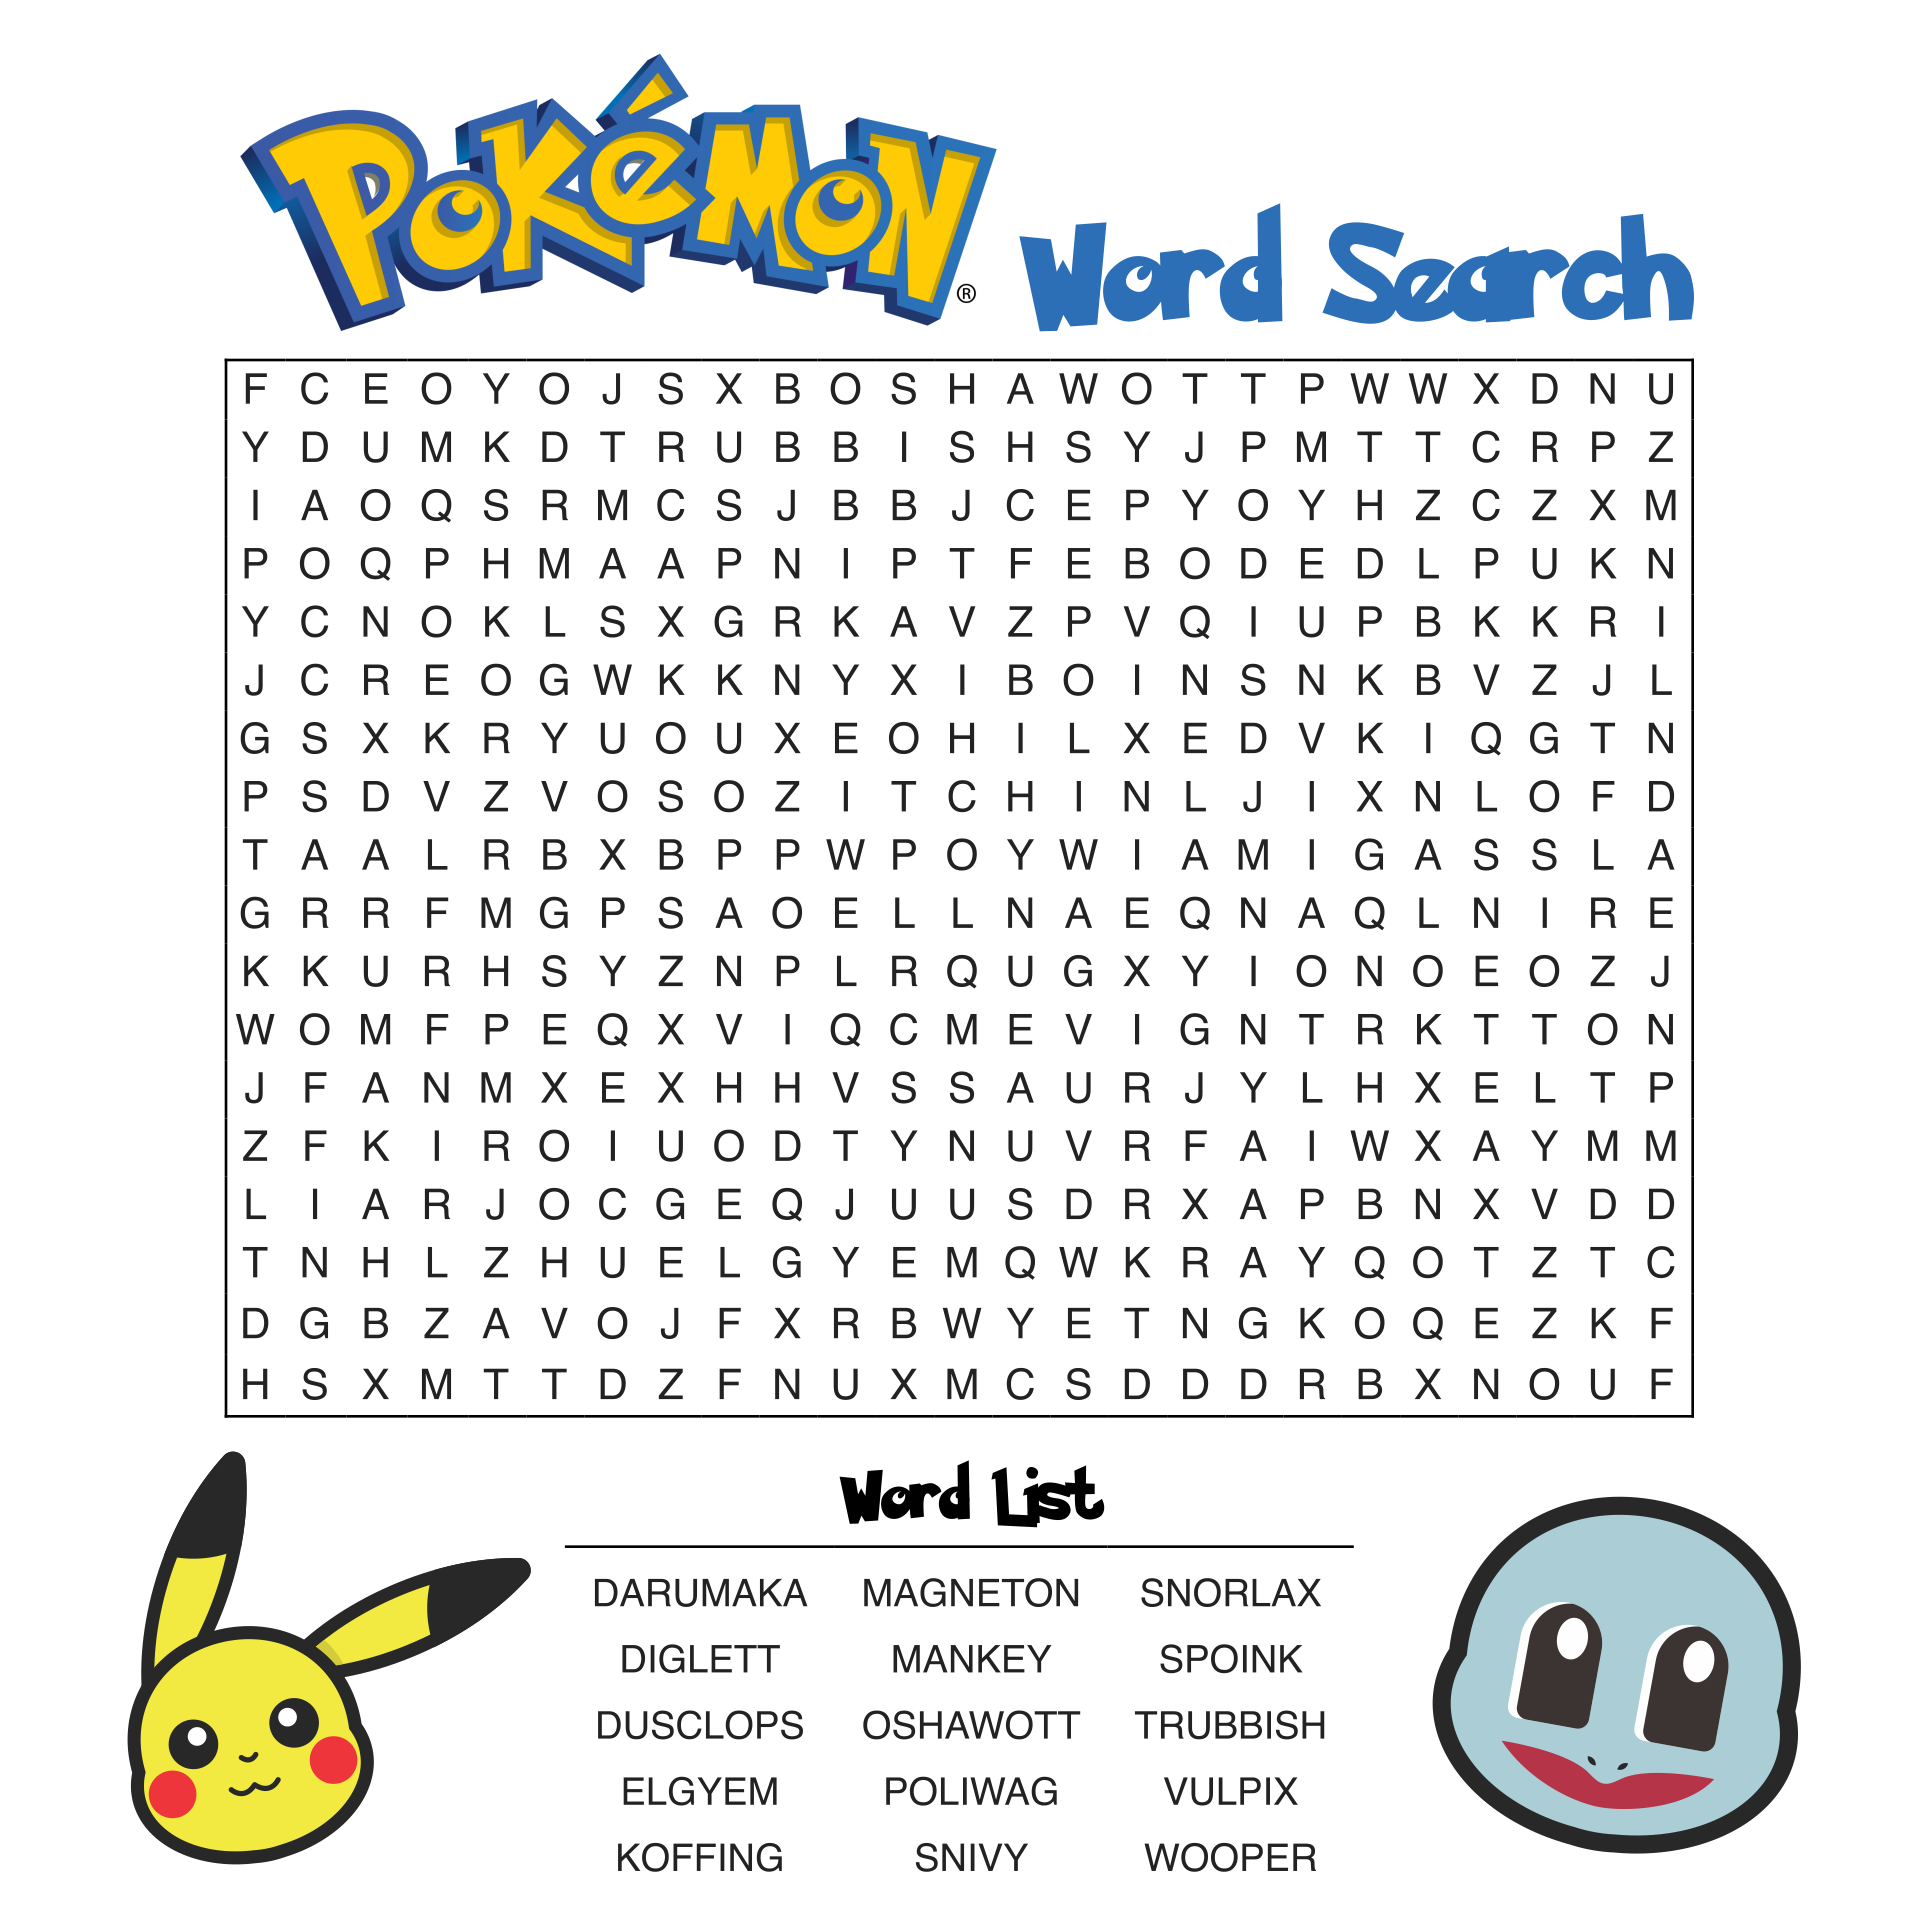 10 Best Pokemon Word Search Puzzles Printable